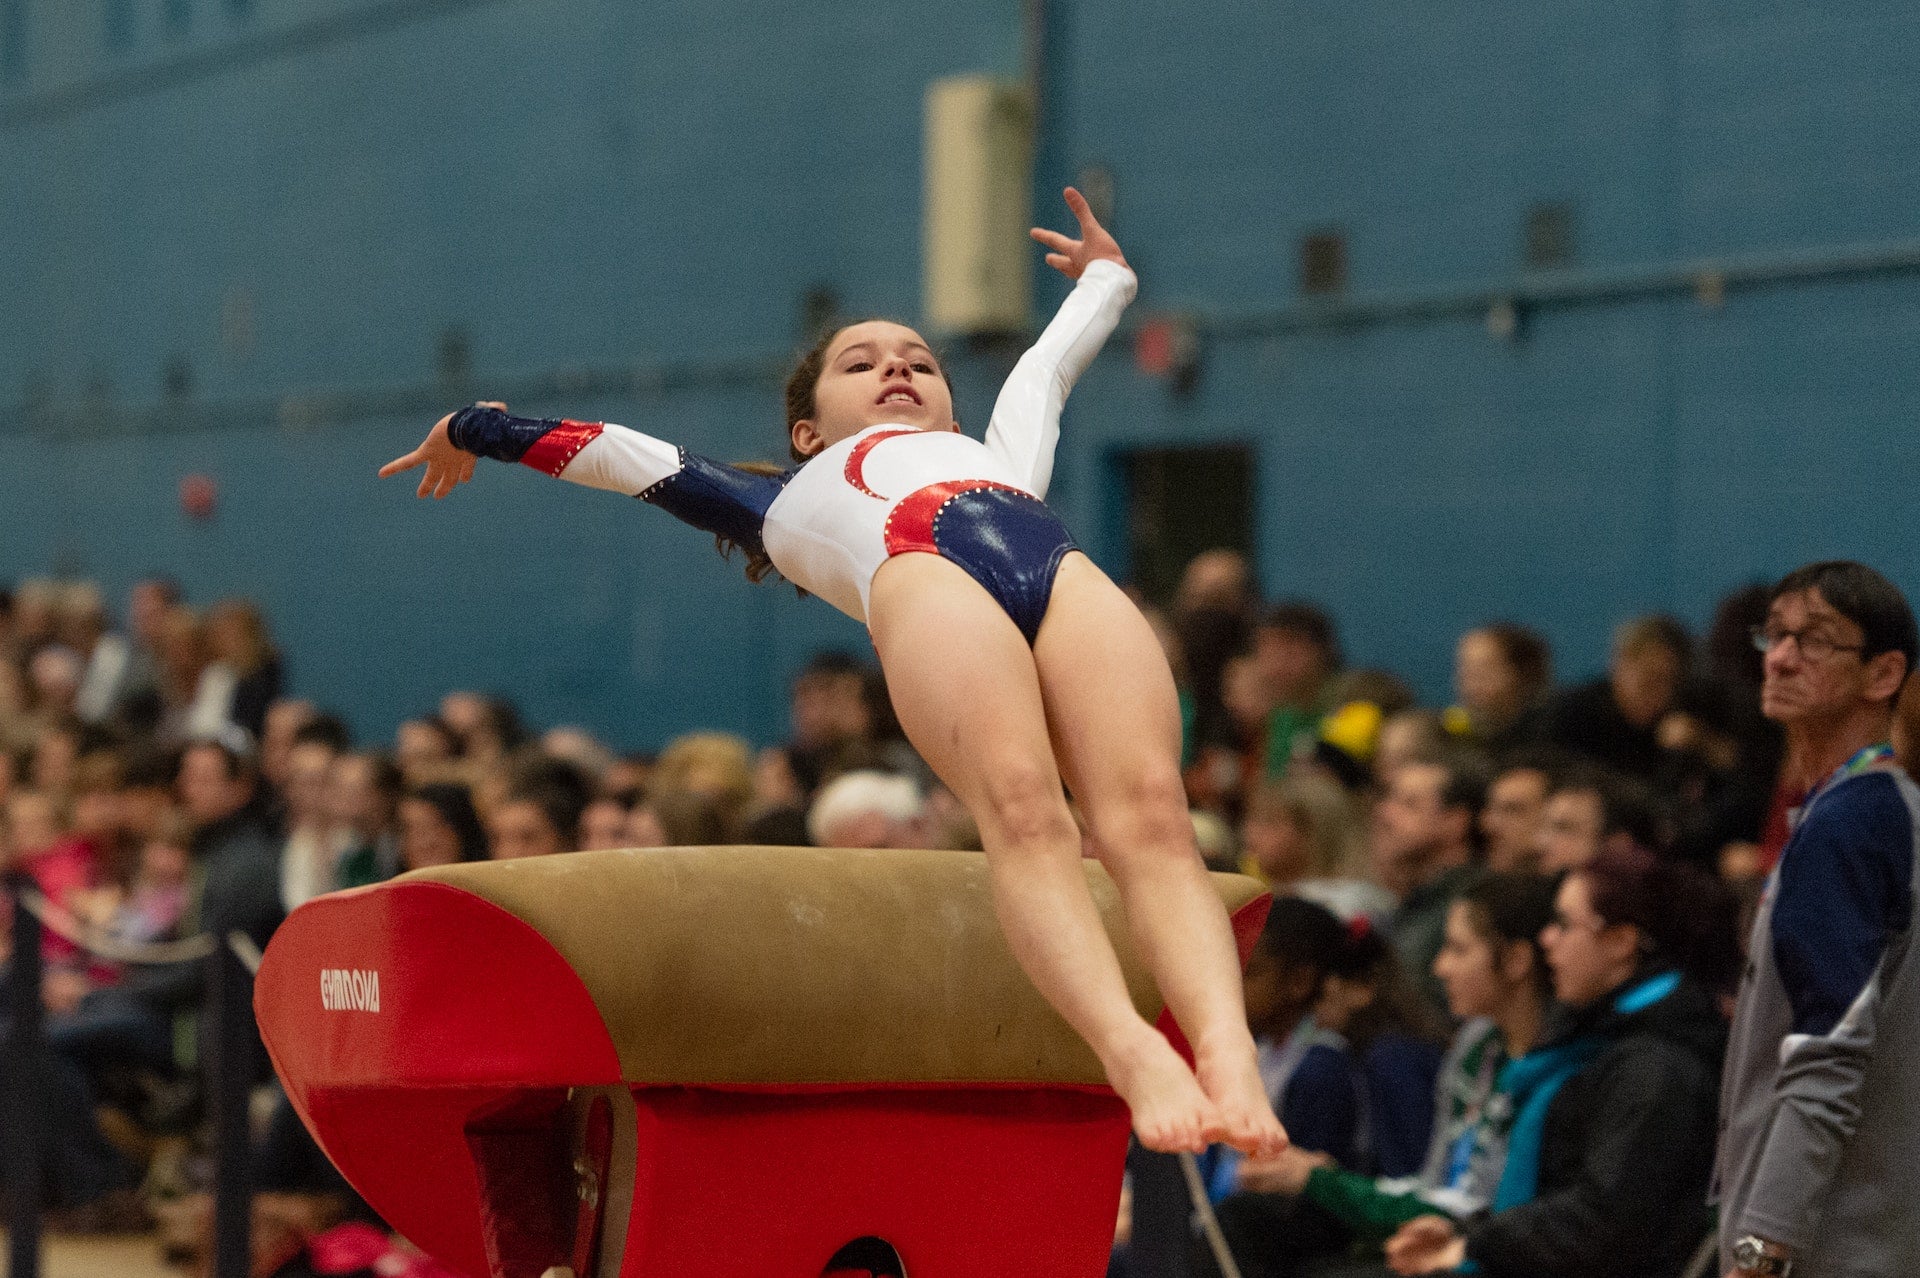 Young woman doing gymnastics, wearing a gym leotard and tights